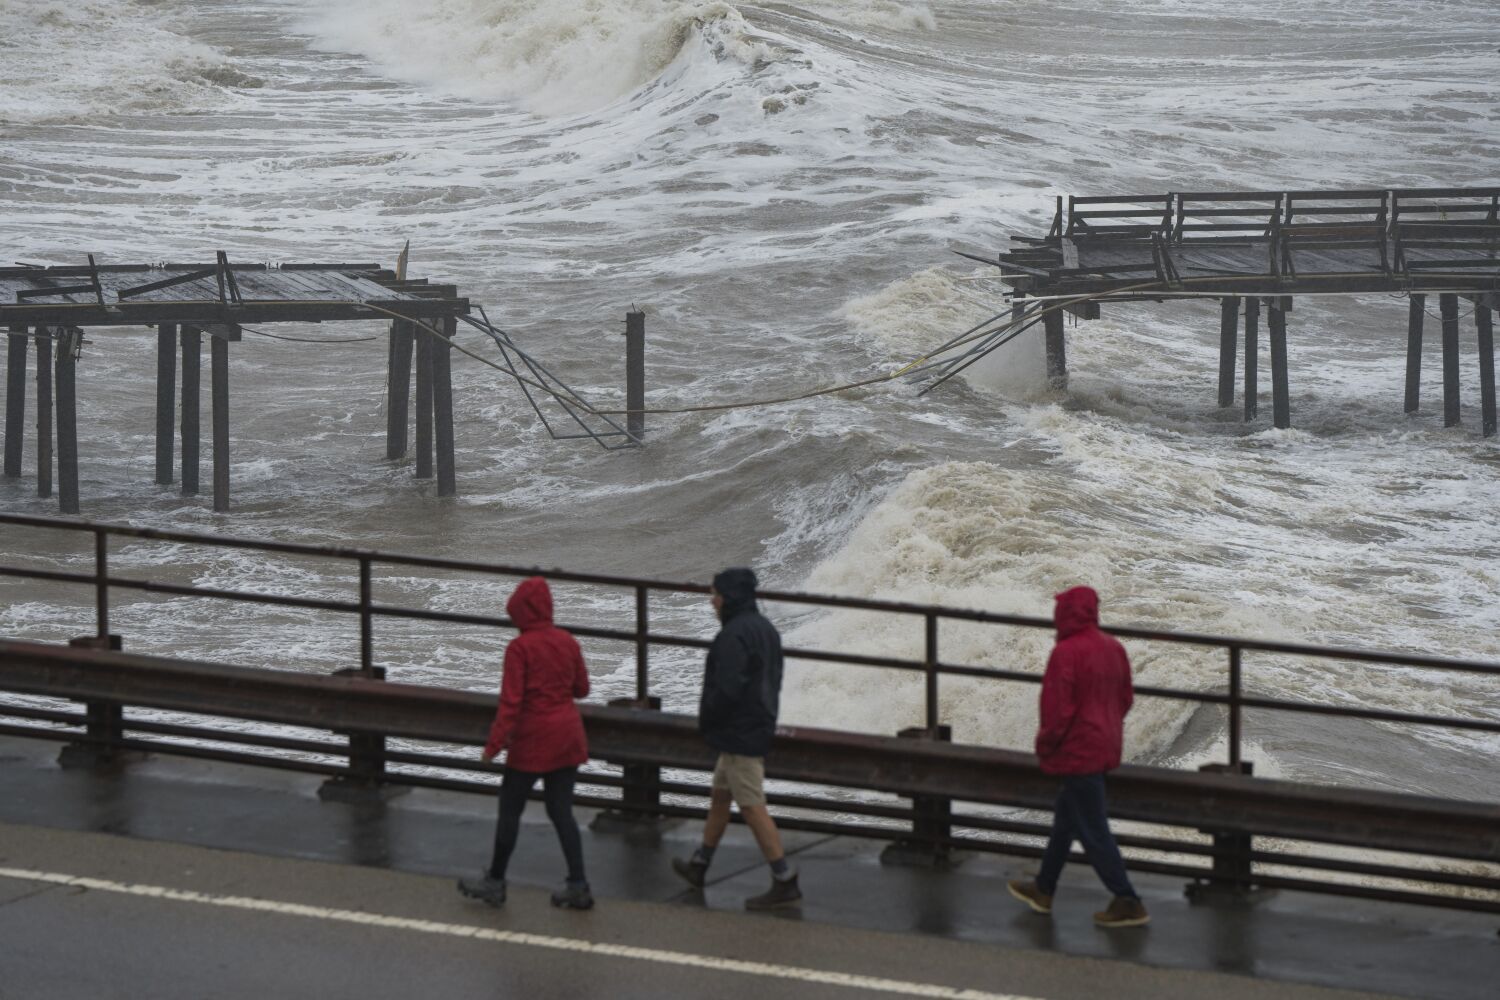 California battered with huge waves up and down the coast